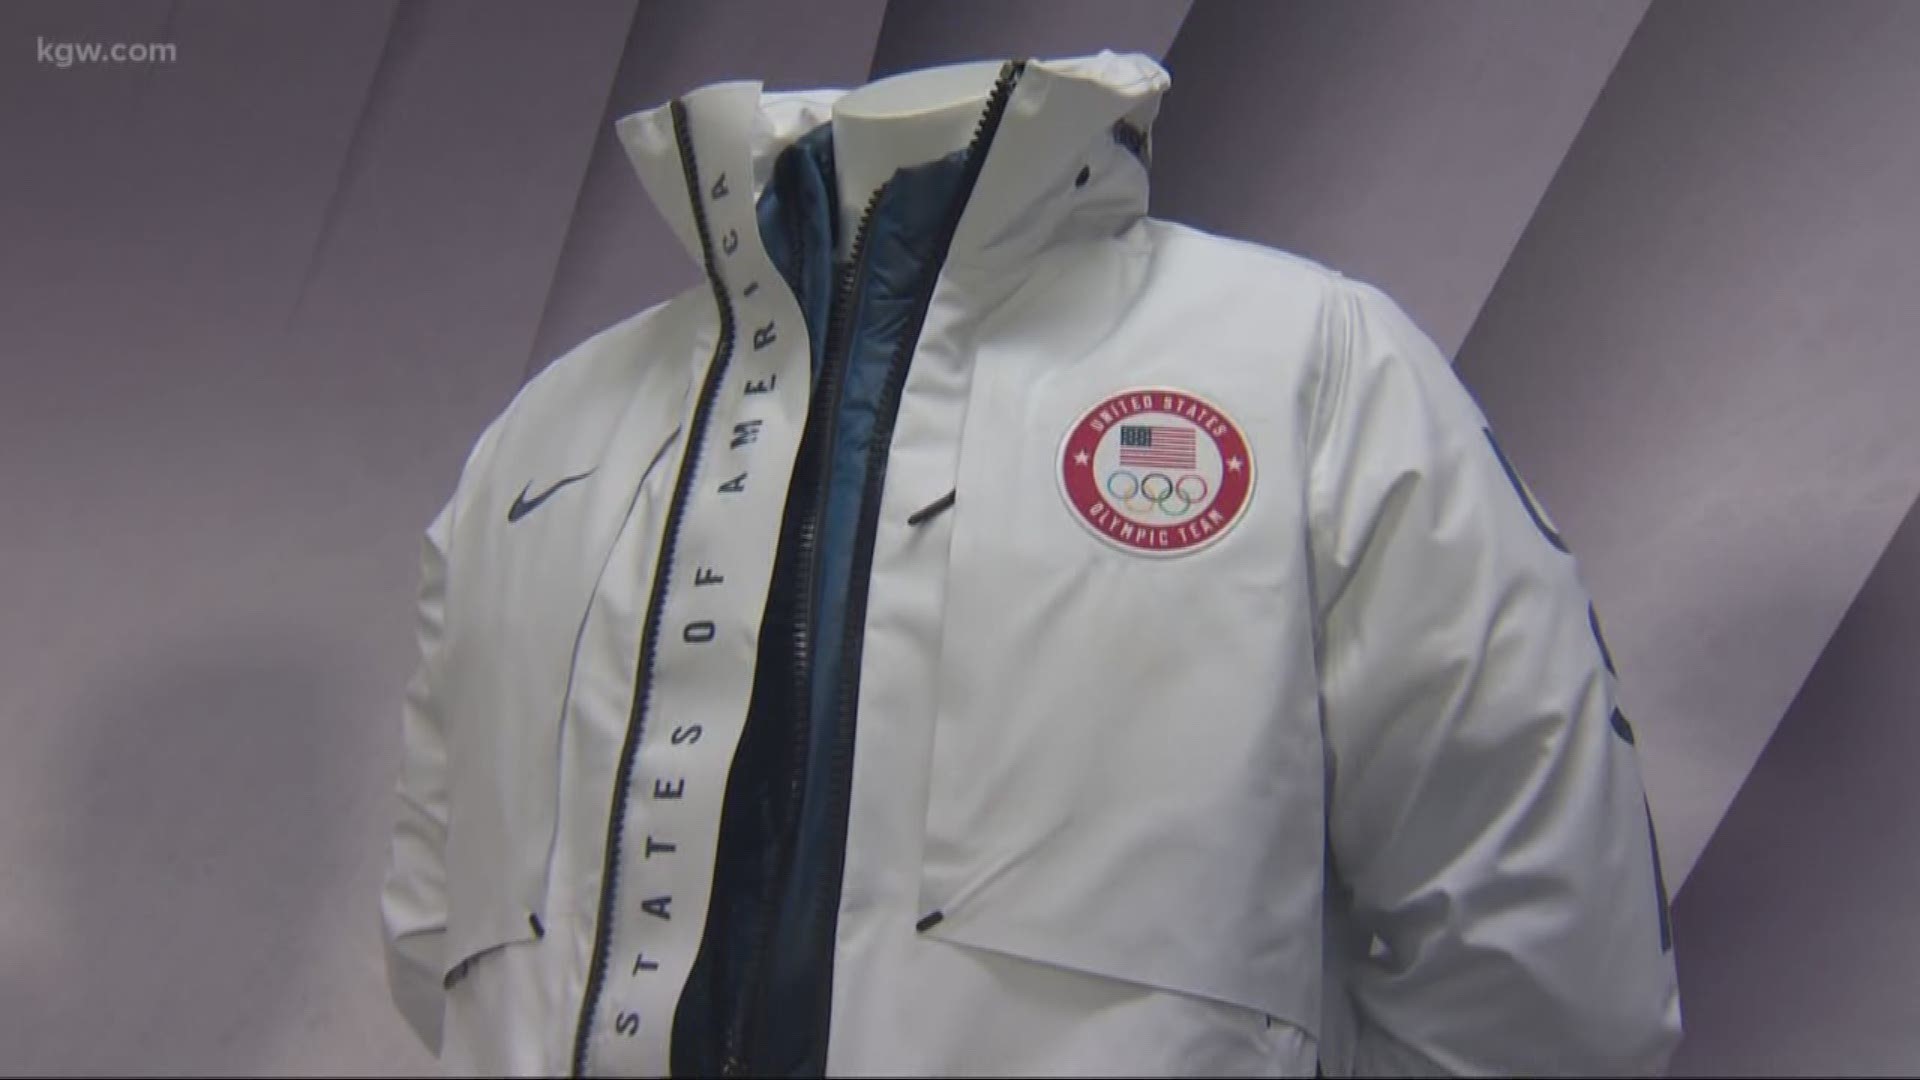 Nike unveils Team USA's podium outfits for Olympics